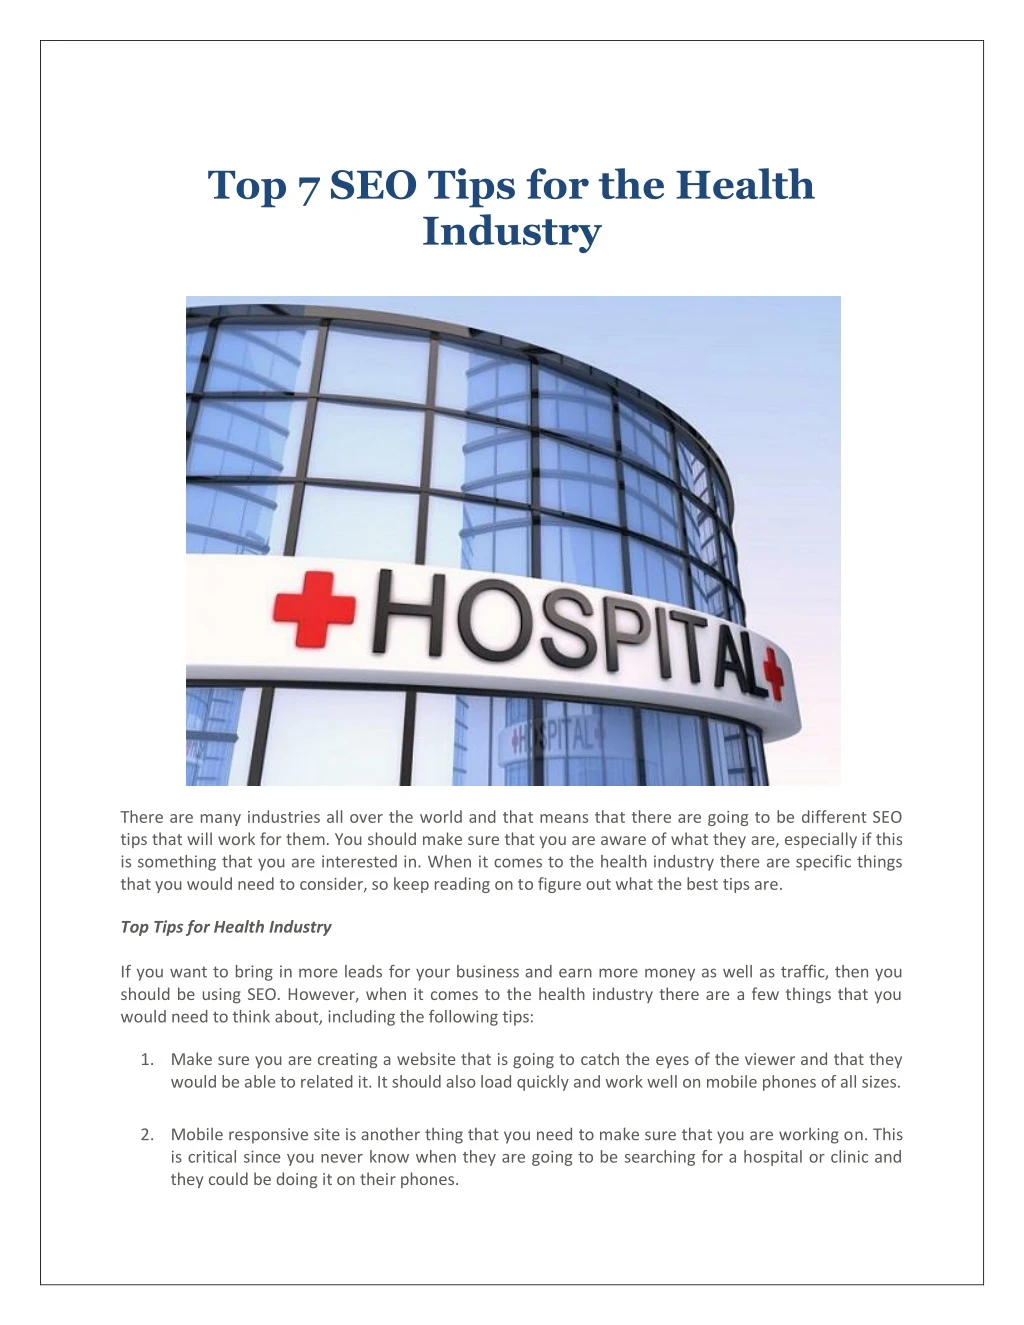 top 7 seo tips for the health industry